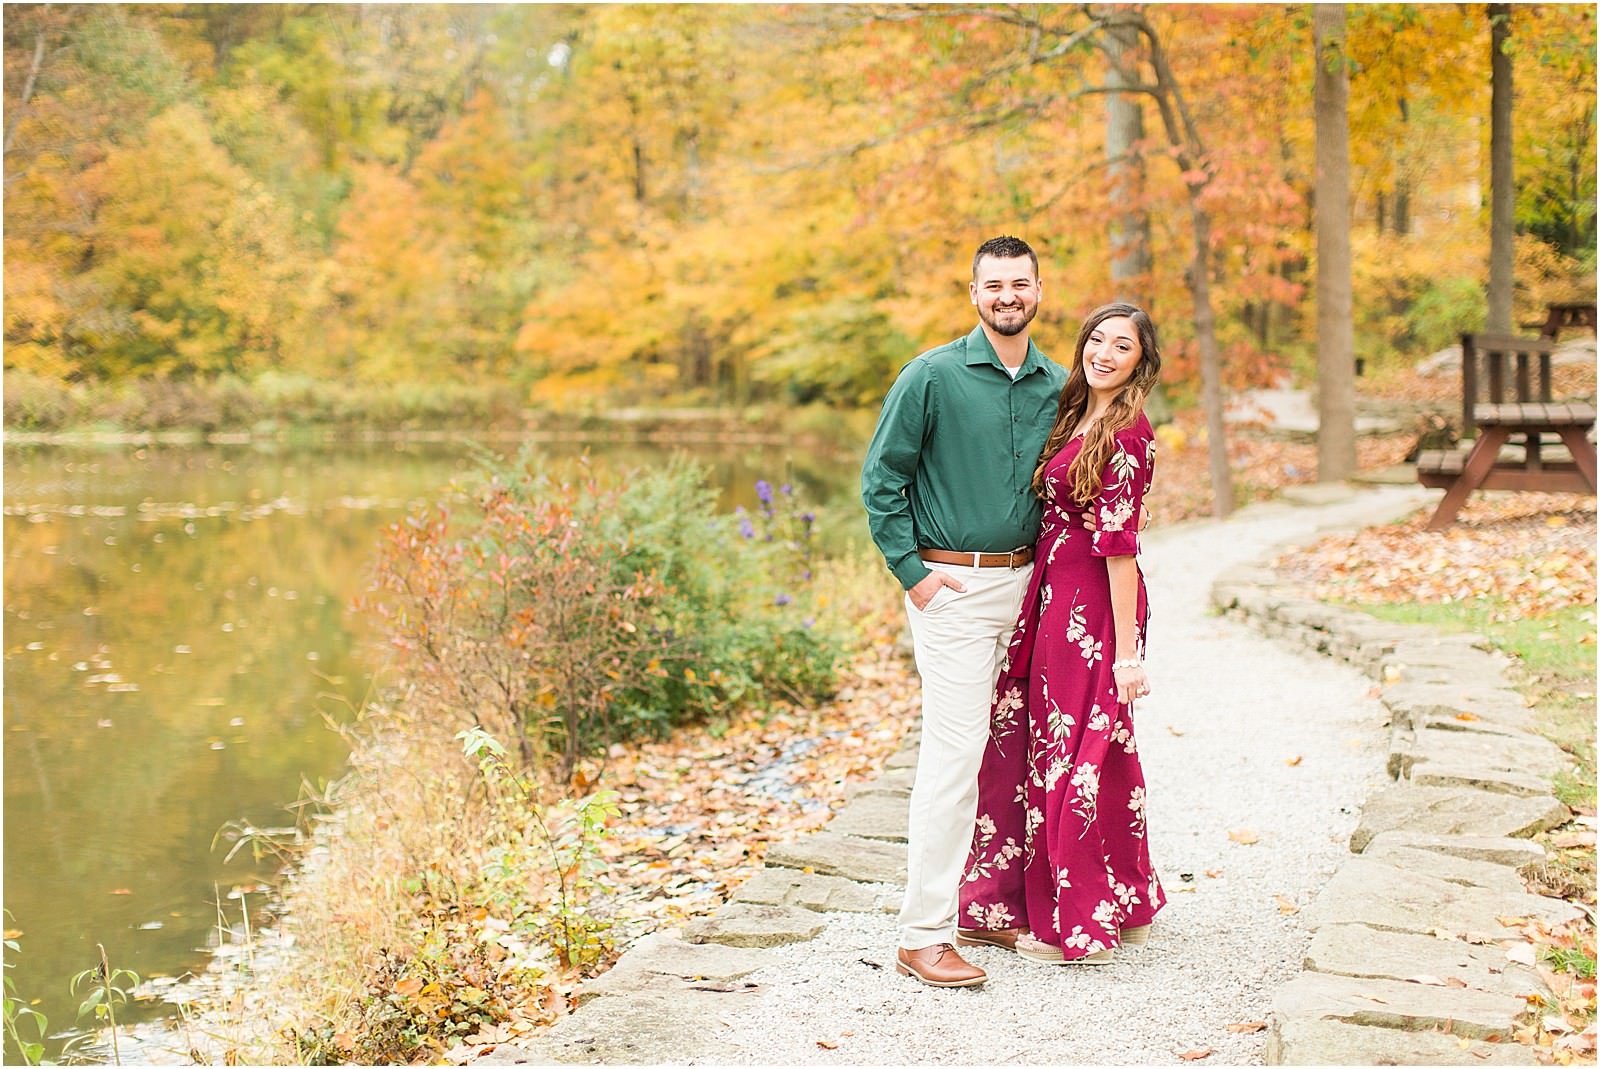 A Fall Oliver Winery Engagement Session | Sally and Andrew | Bret and Brandie Photography 0010.jpg